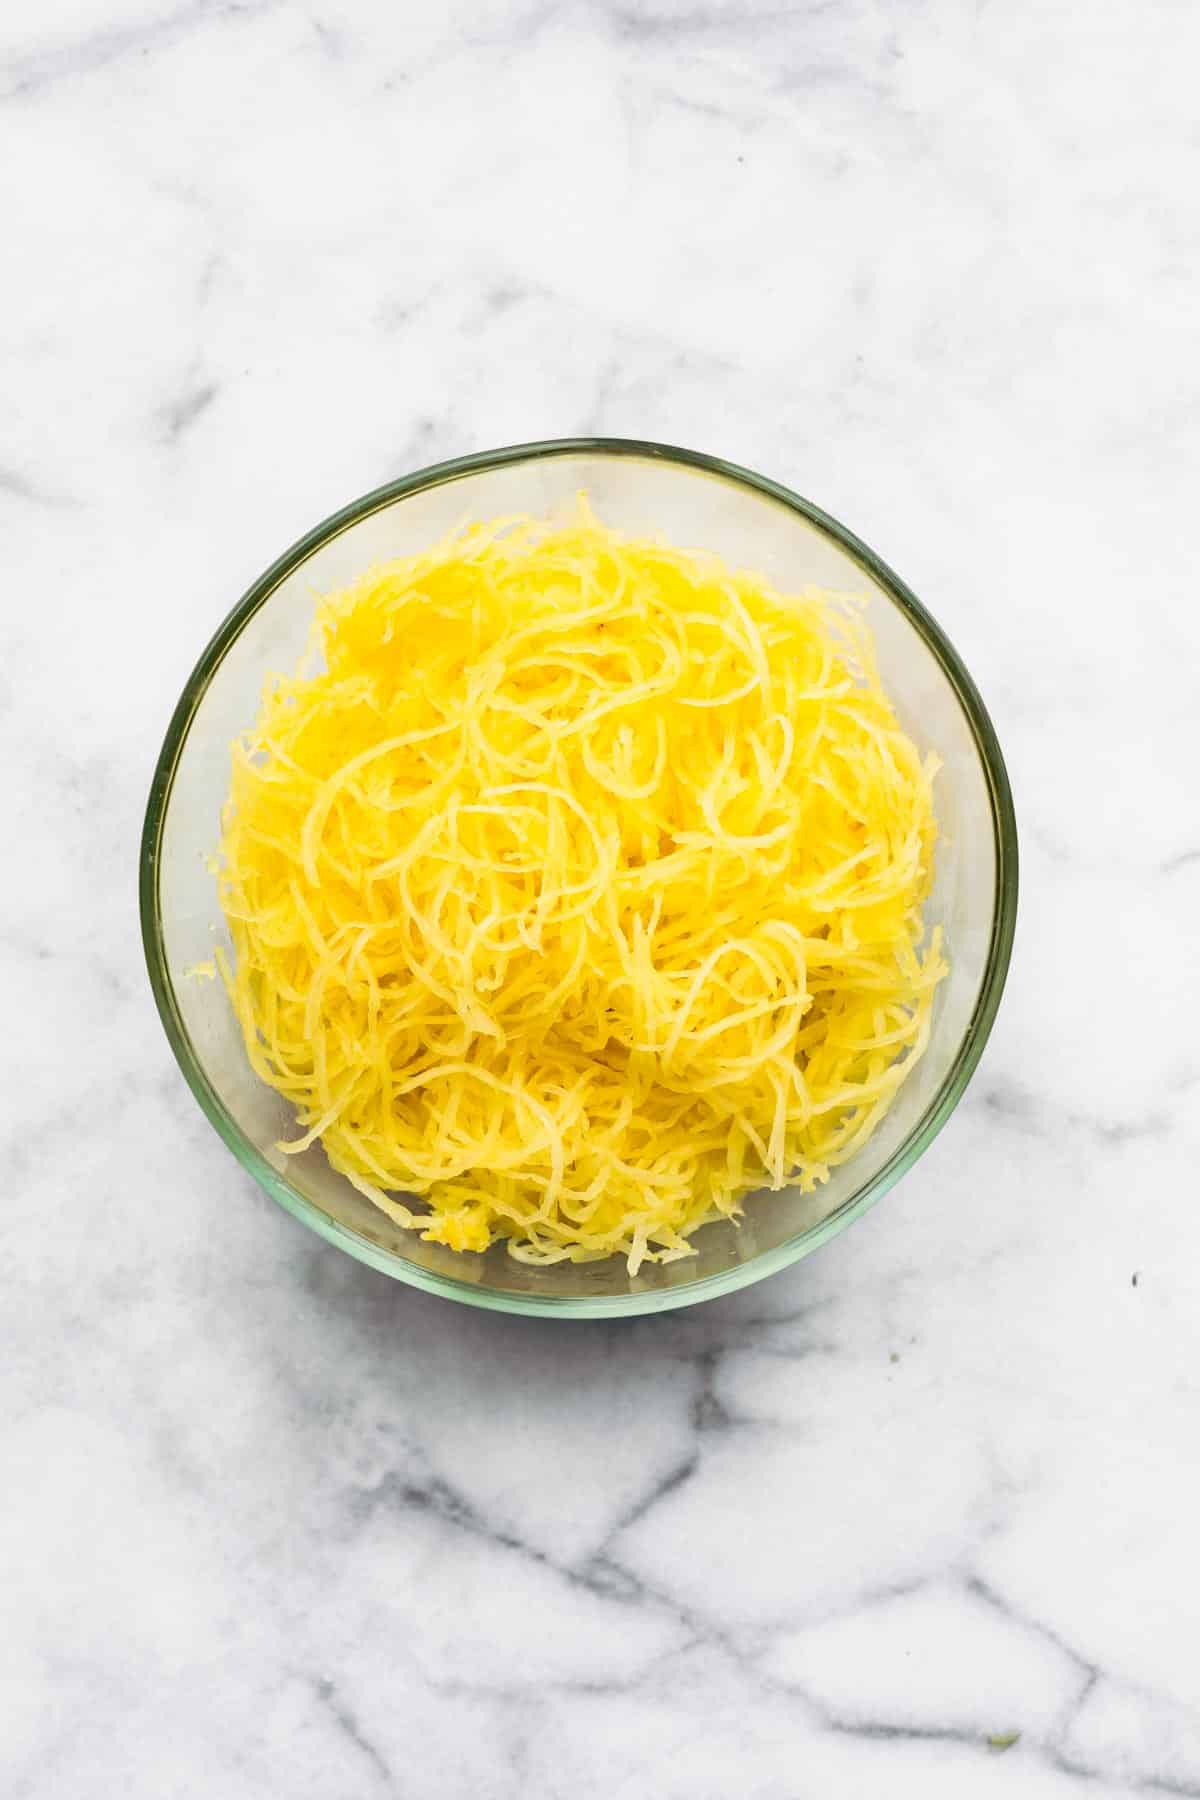 A glass bowl with spaghetti squash noodles in it on a white marble countertop.